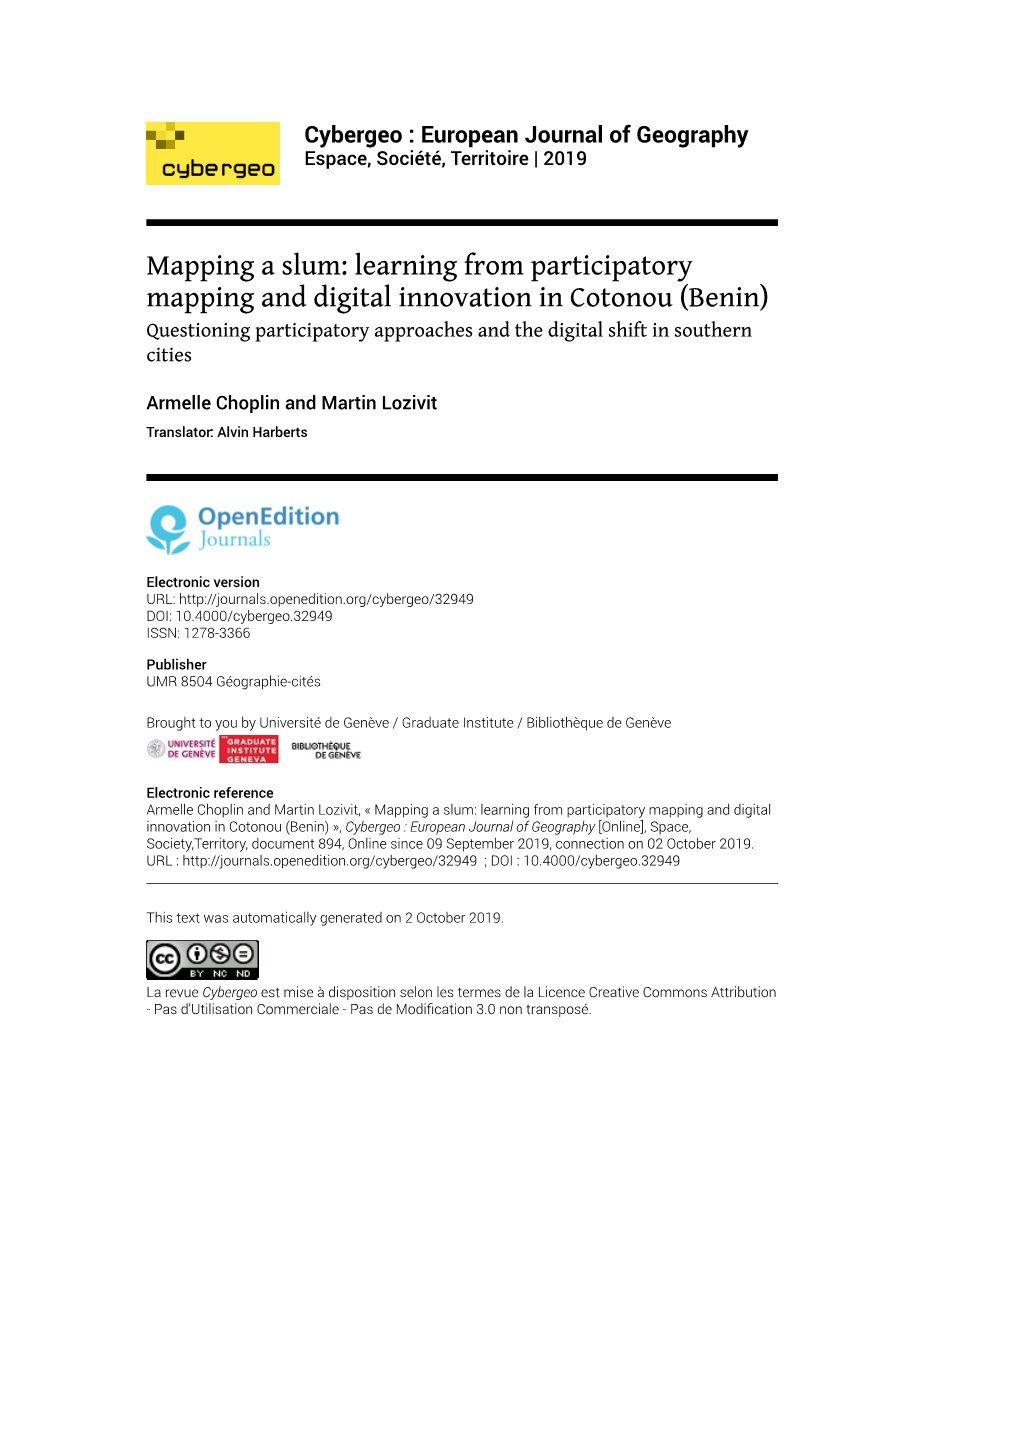 Learning from Participatory Mapping and Digital Innovation in Cotonou (Benin) Questioning Participatory Approaches and the Digital Shift in Southern Cities